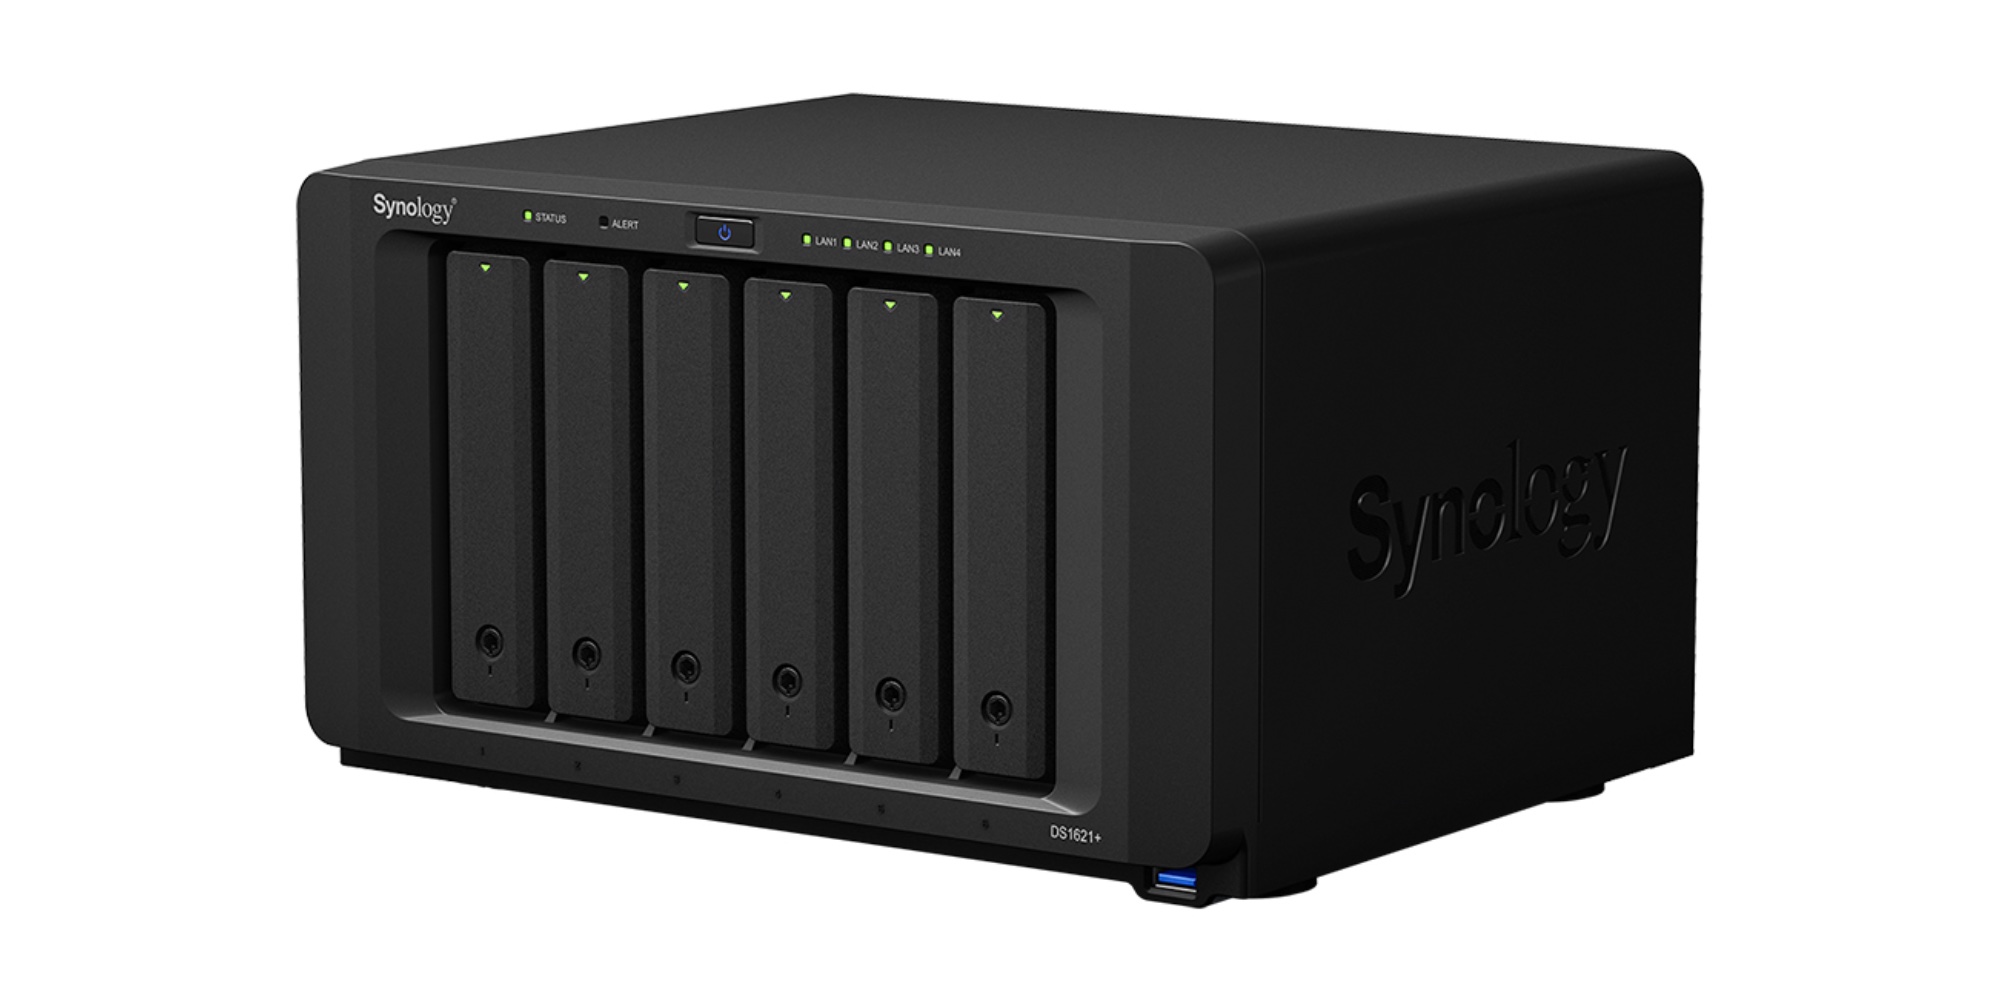 Synology on LinkedIn: Synology is excited to officially unveil its